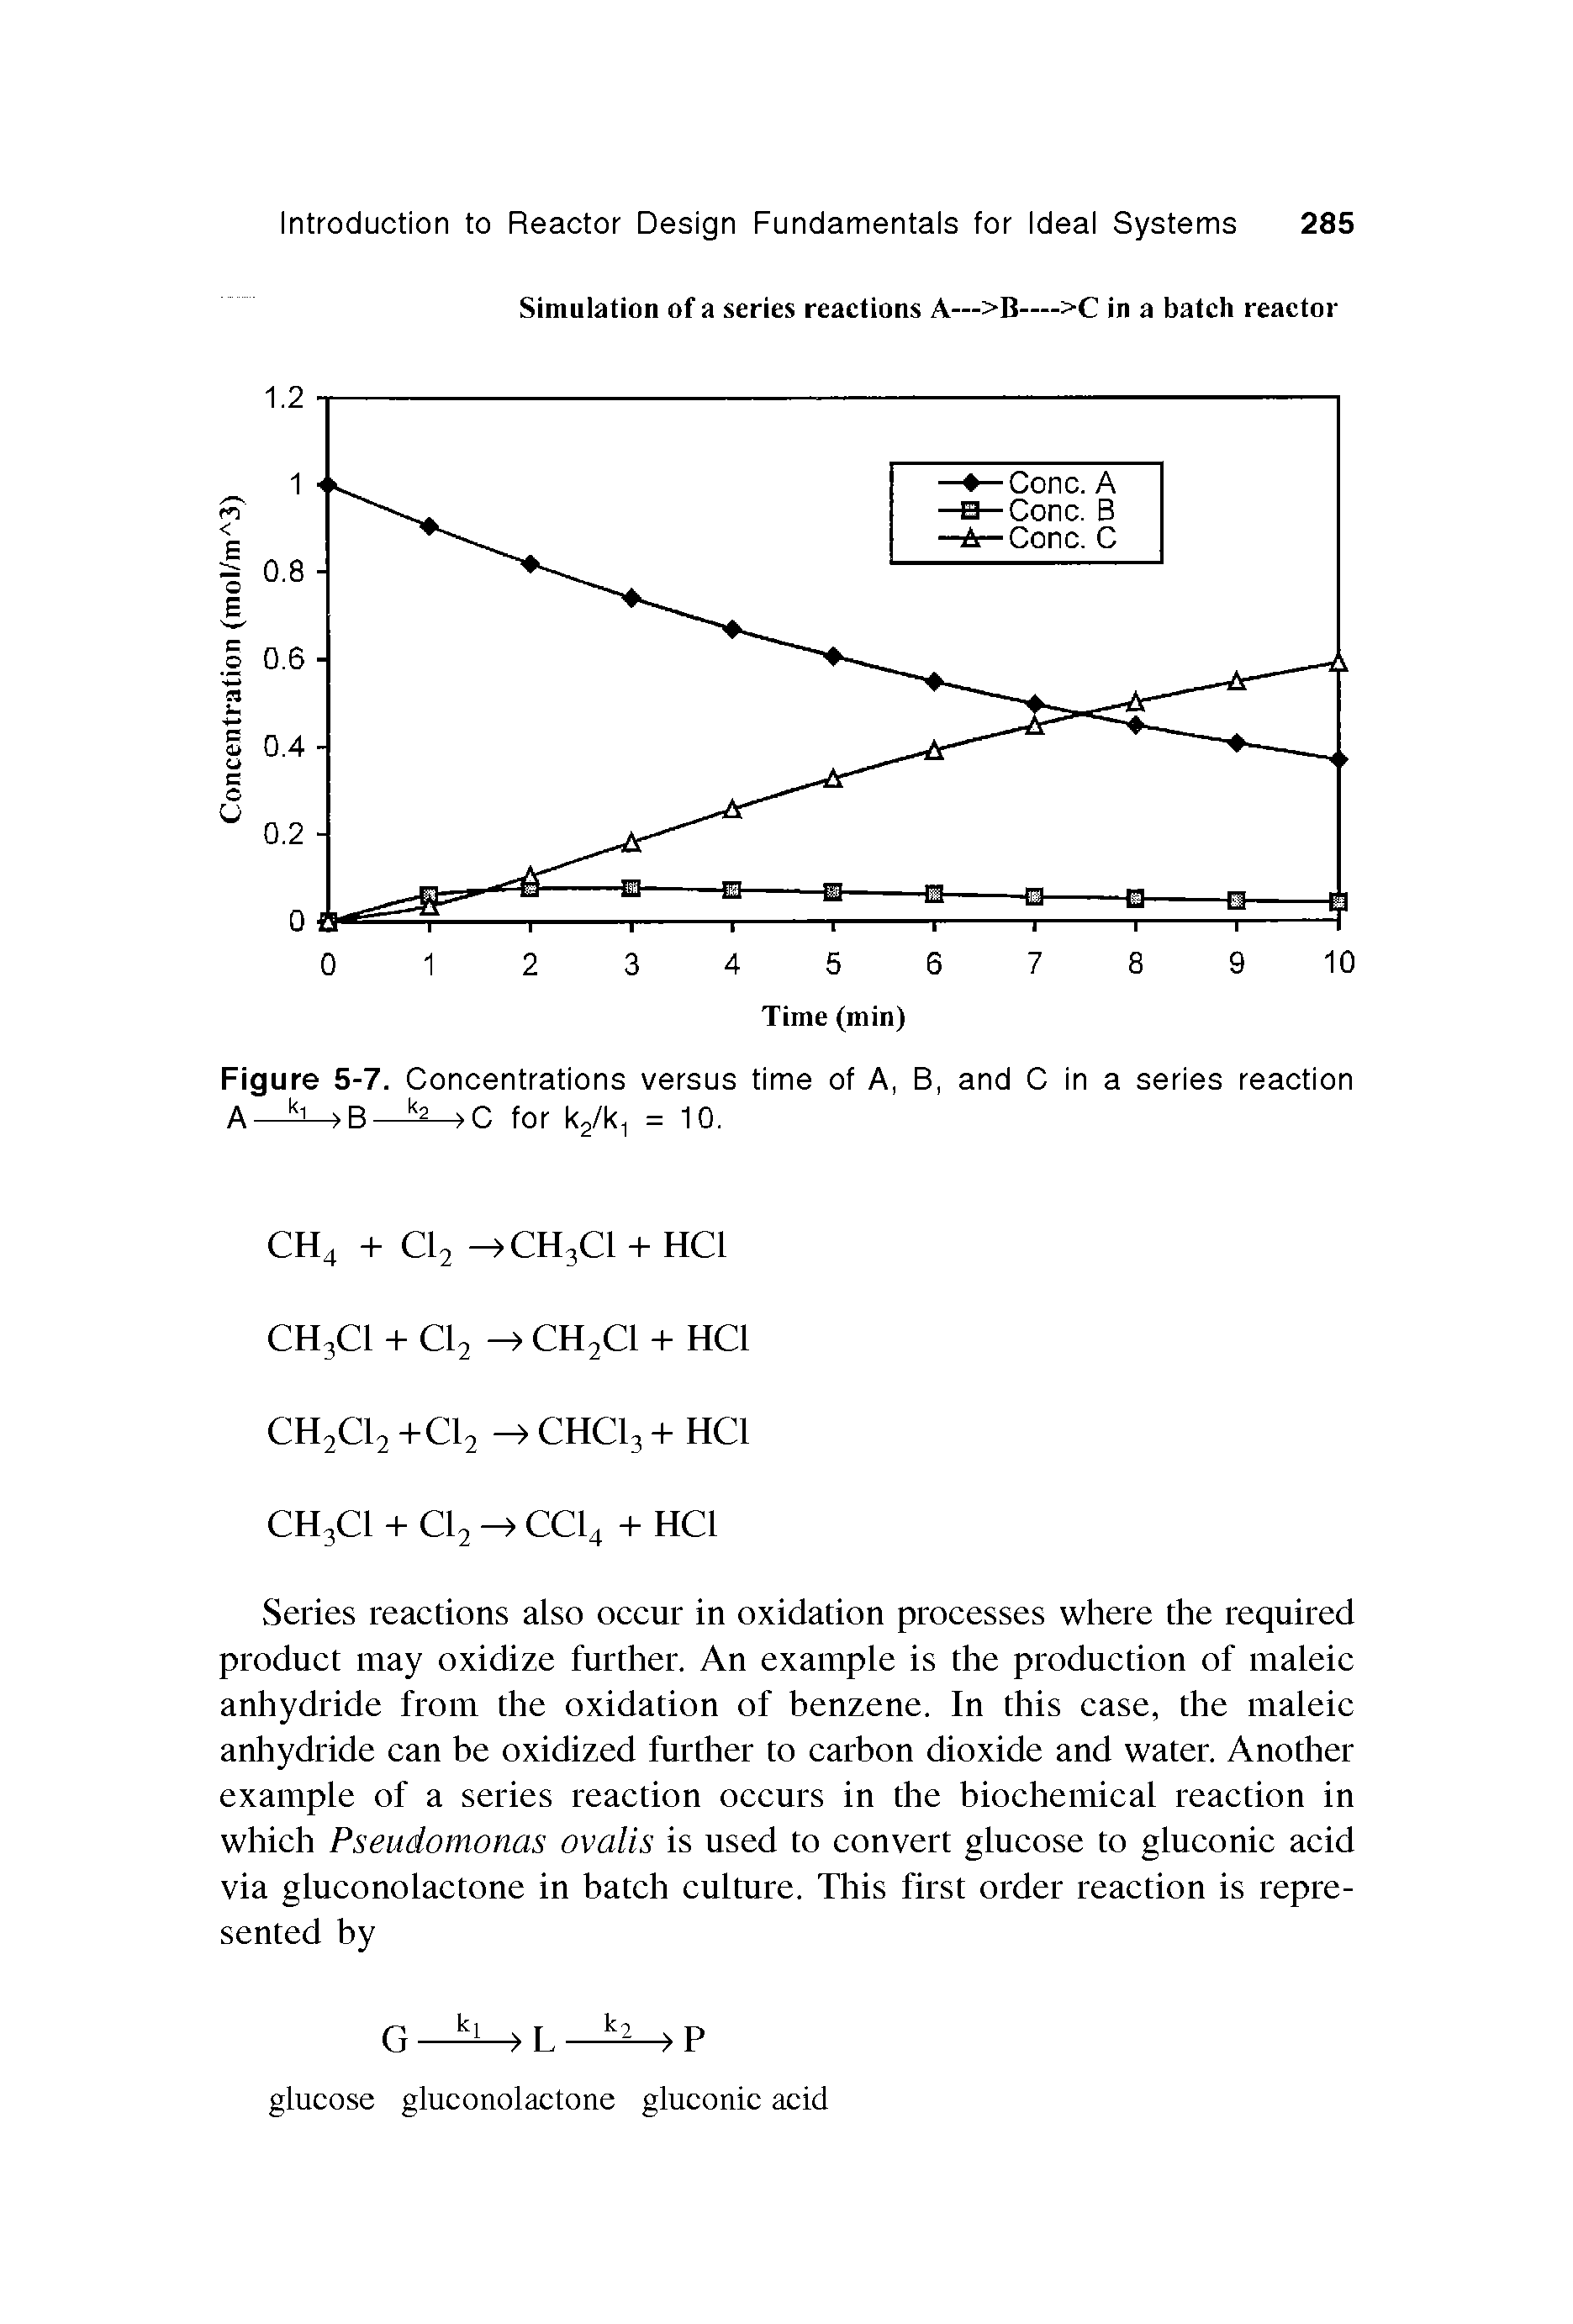 Figure 5-7. Concentrations versus time of A, B, and C in a series reaction...